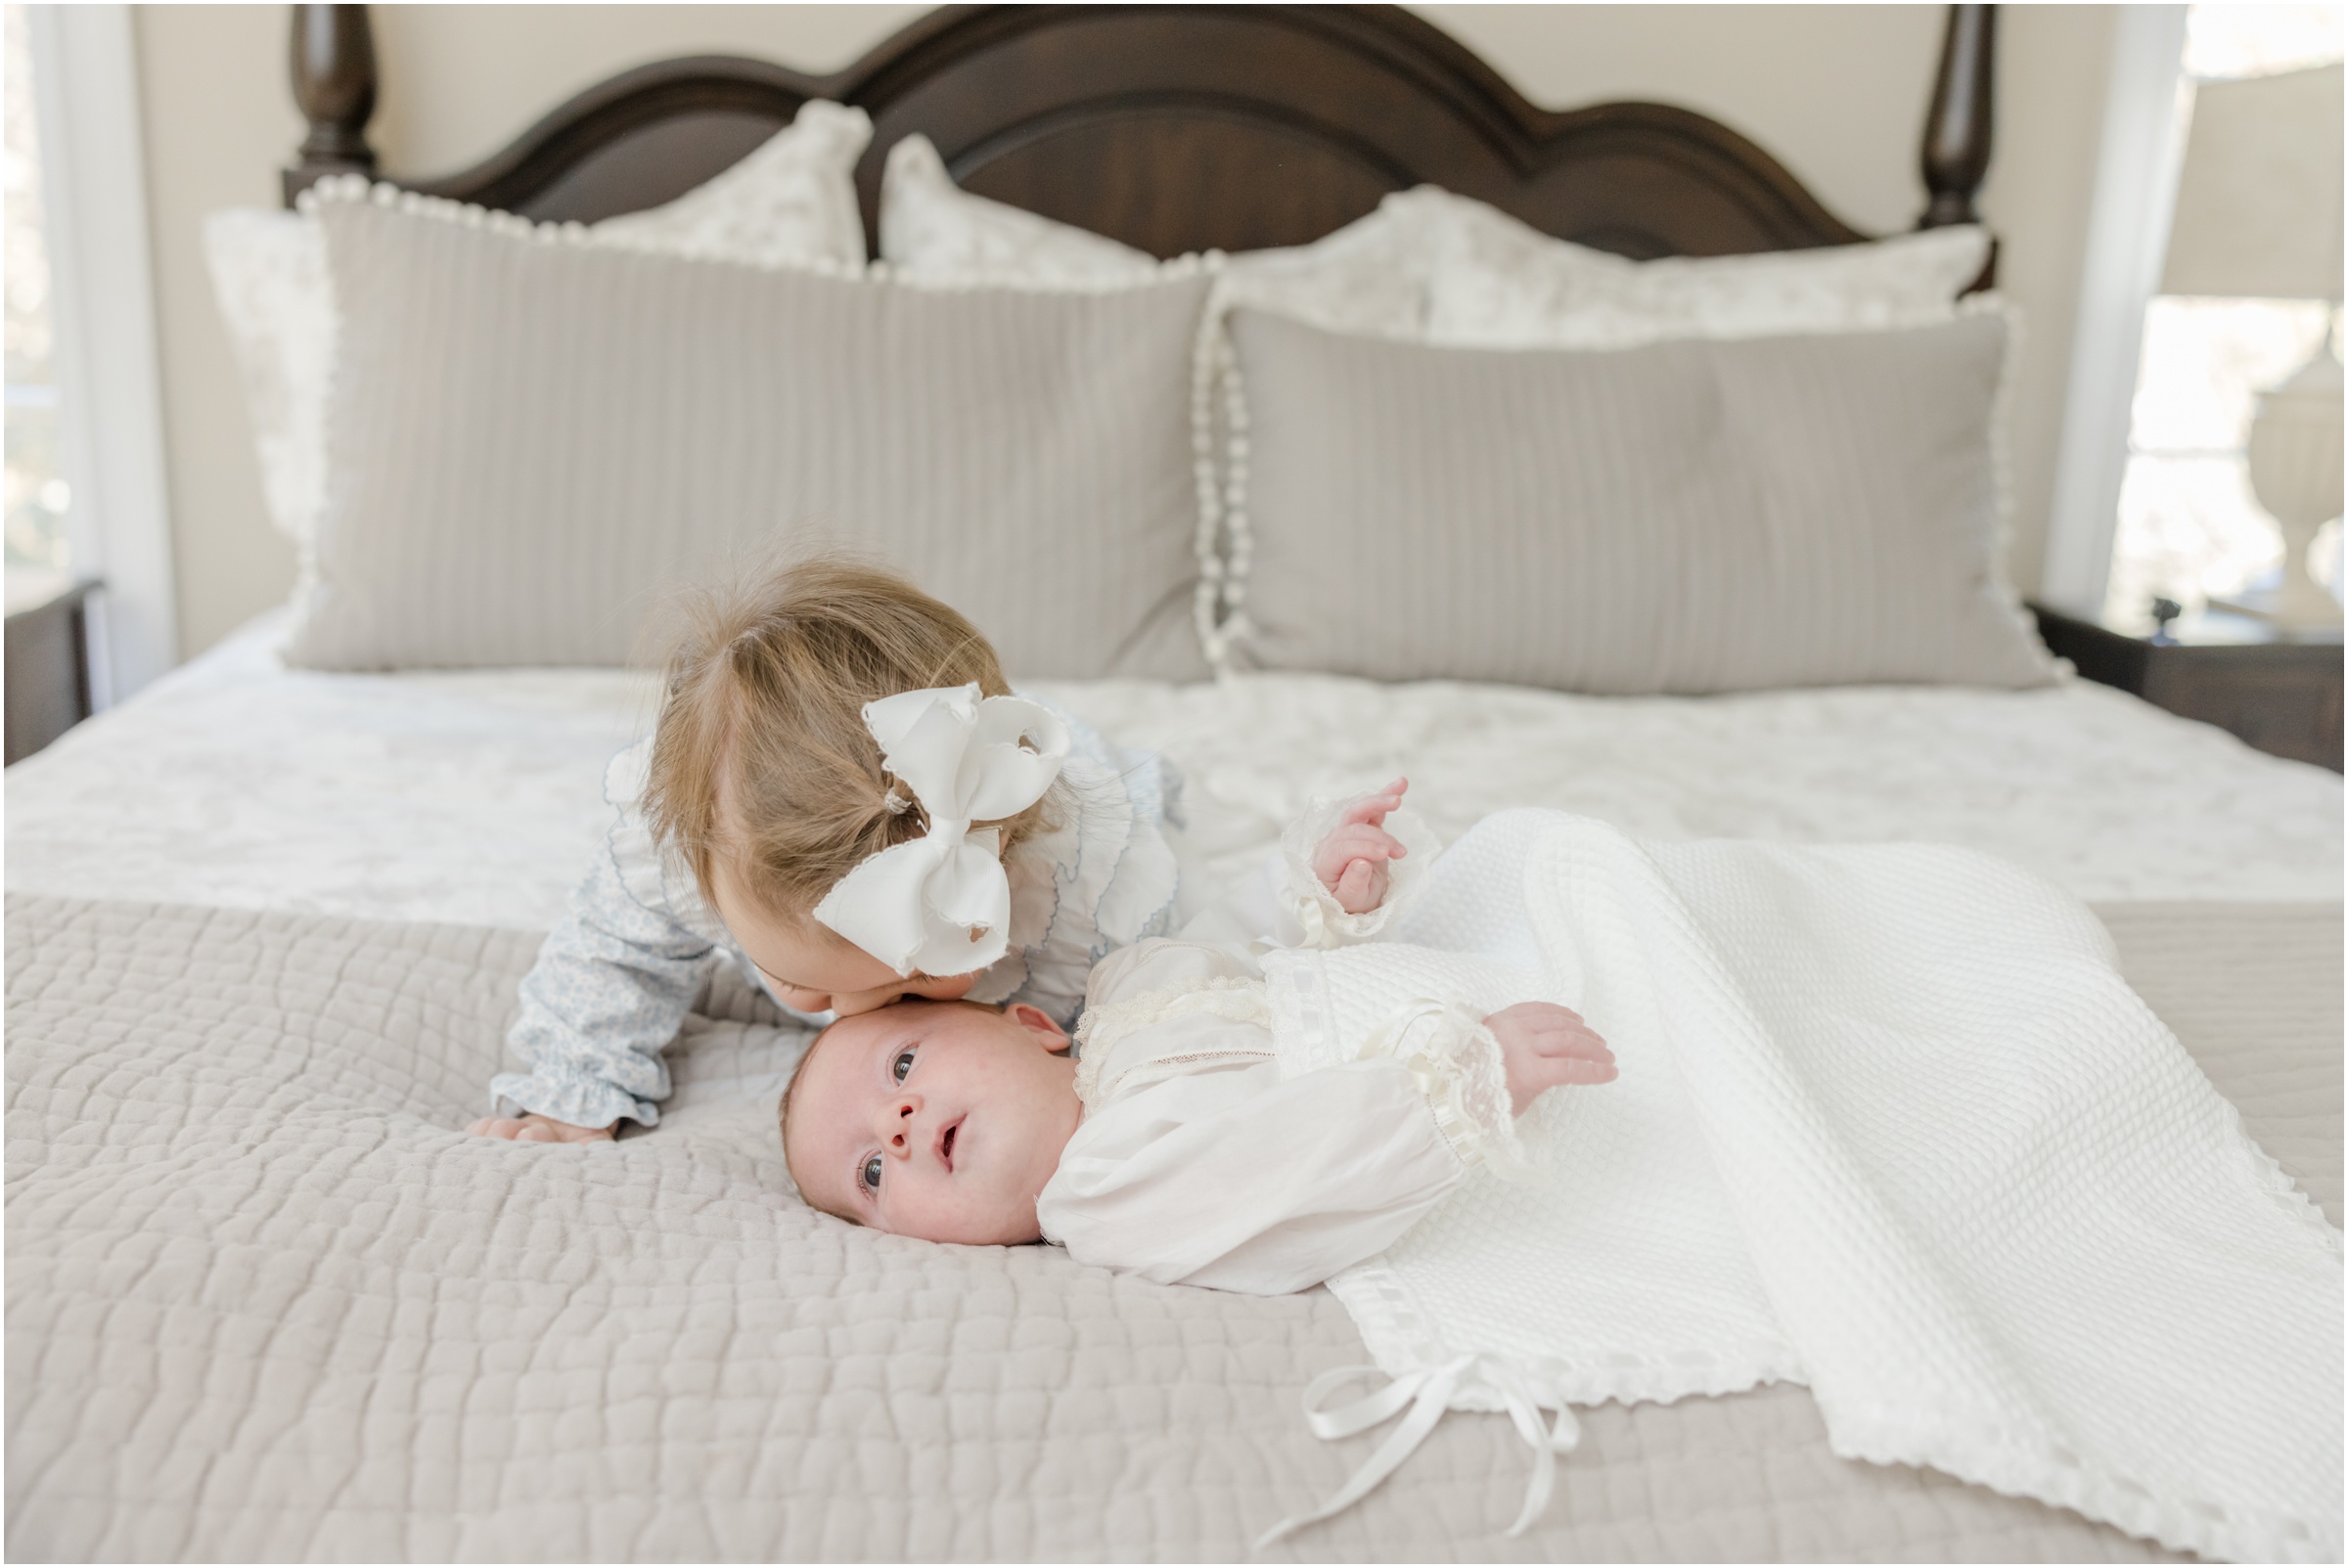 A toddler girl leans over to kiss the head of her newborn baby brother who is laying on their parent's bed during a Greenville newborn photography session.